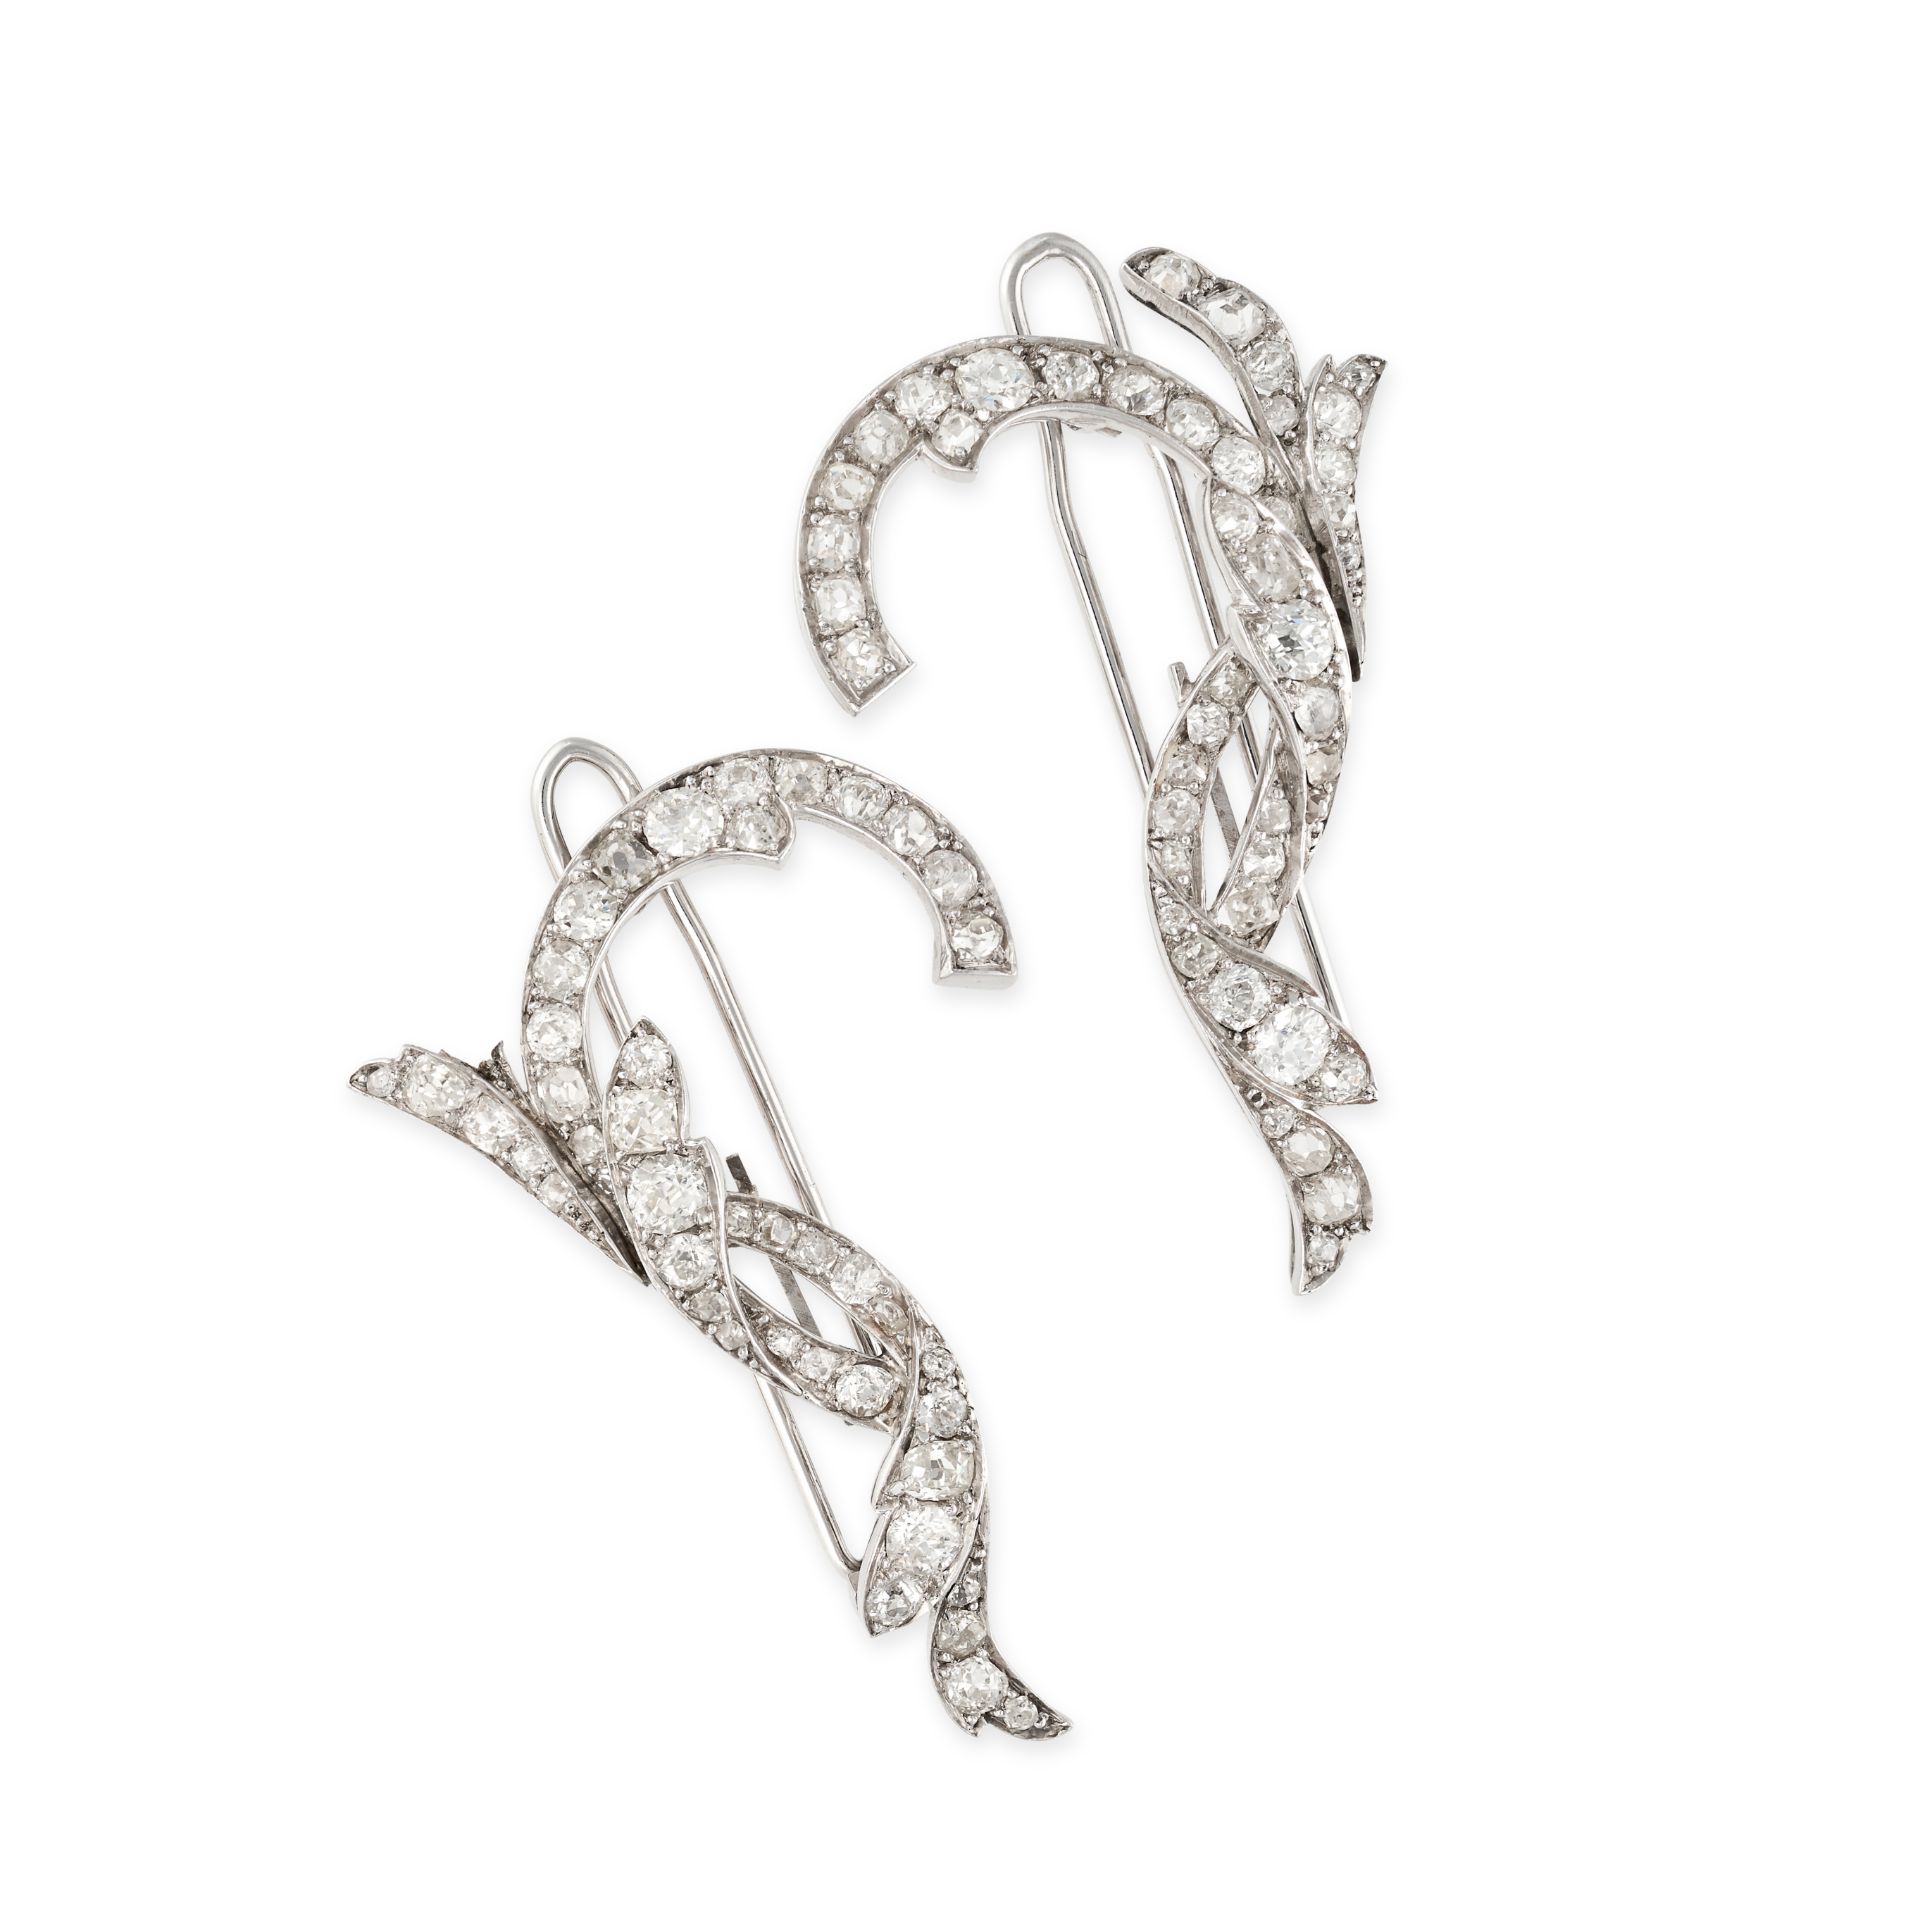 A SET OF DIAMOND HAIR CLIPS in white gold, each hair clip in a scrolling design set with old cut ...